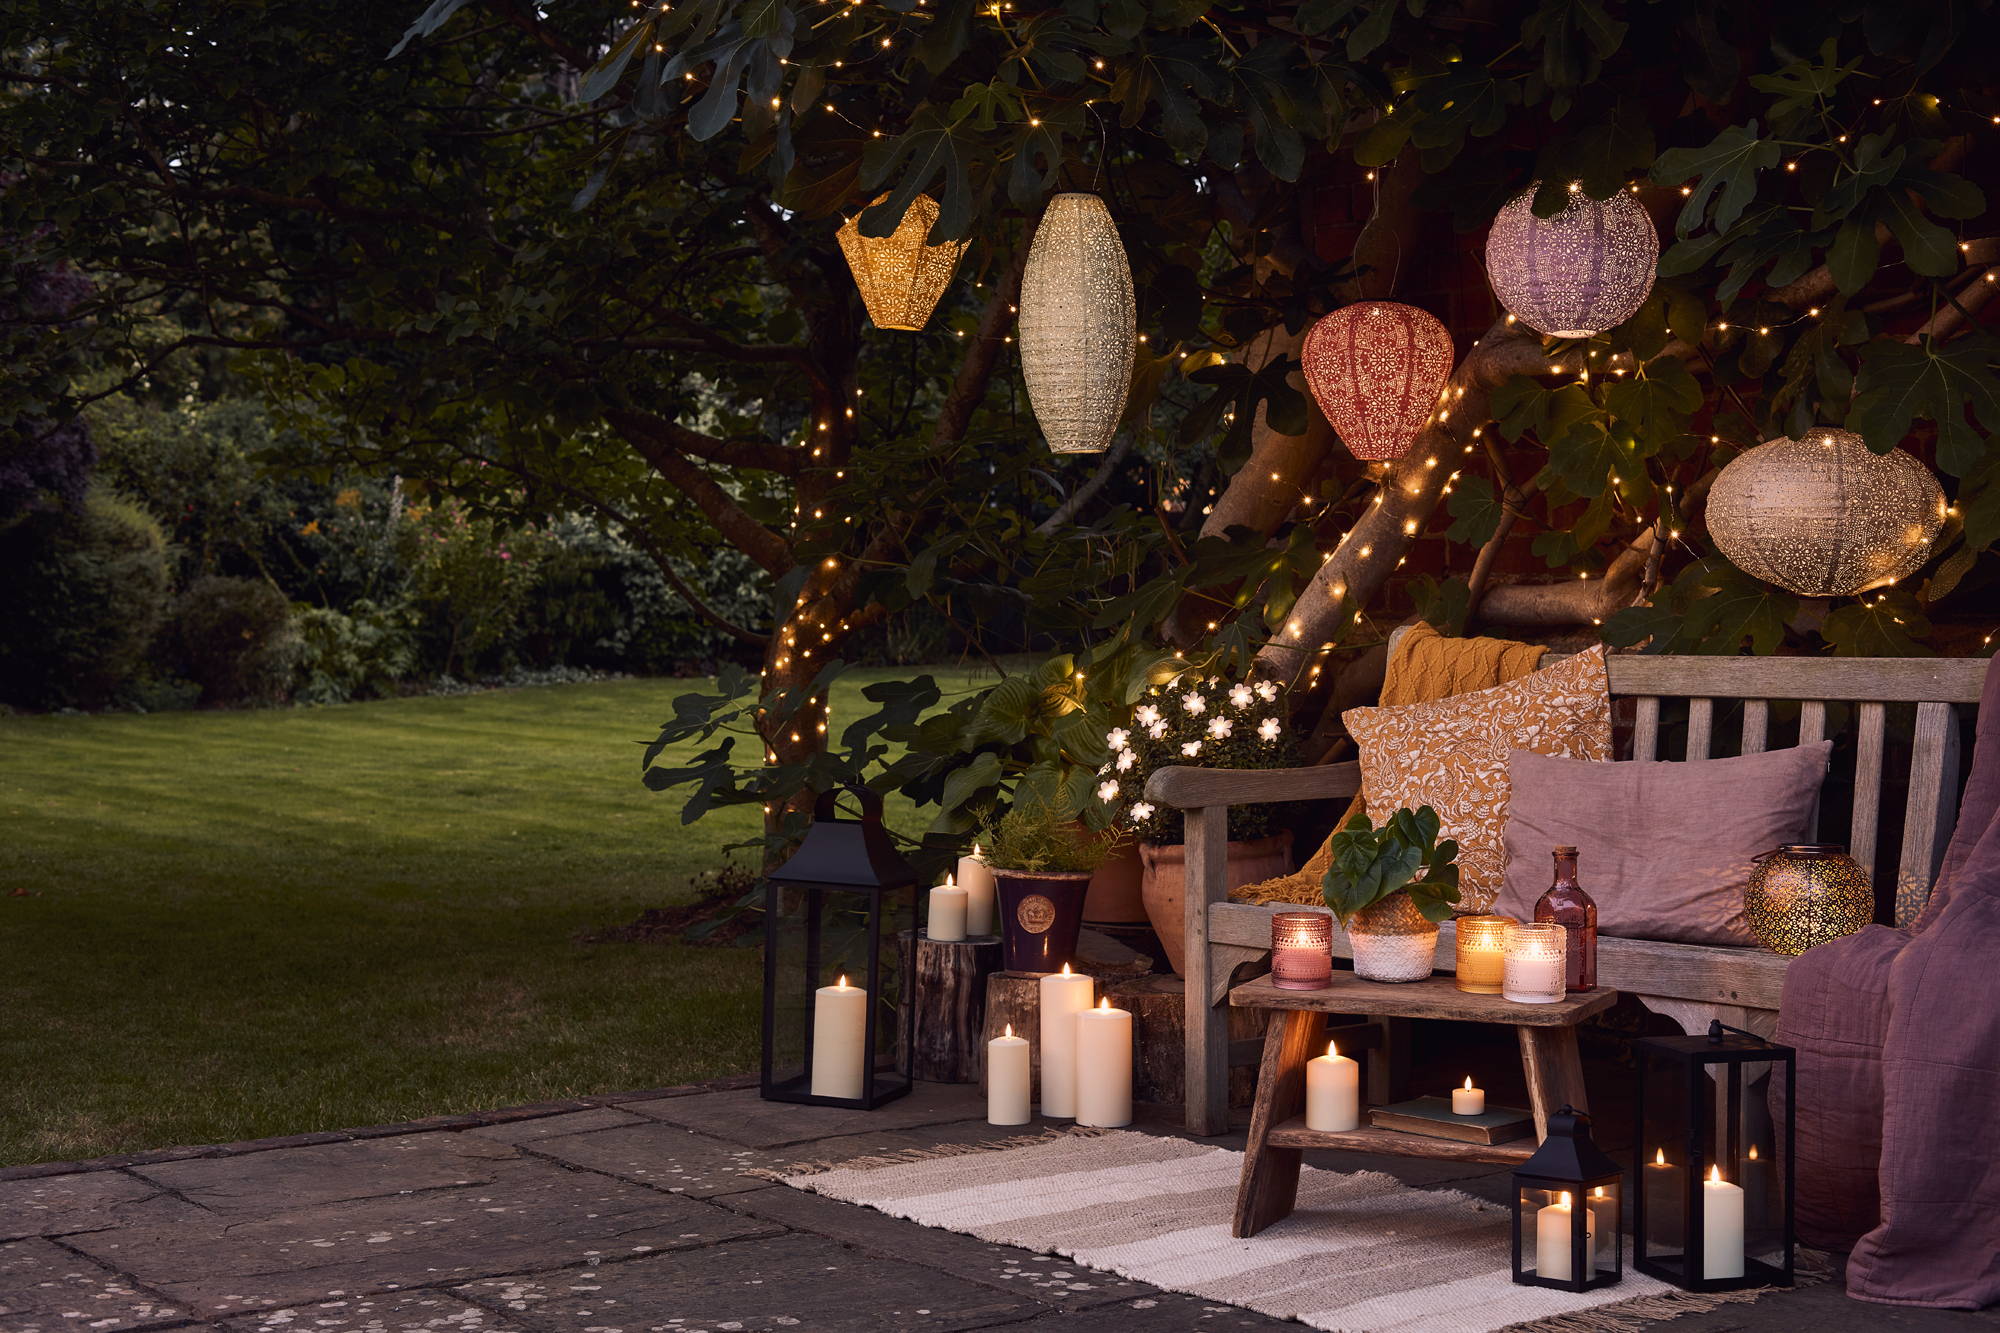 A garden party setting with colourful hanging solar lanterns, LED candles and fairy lights.